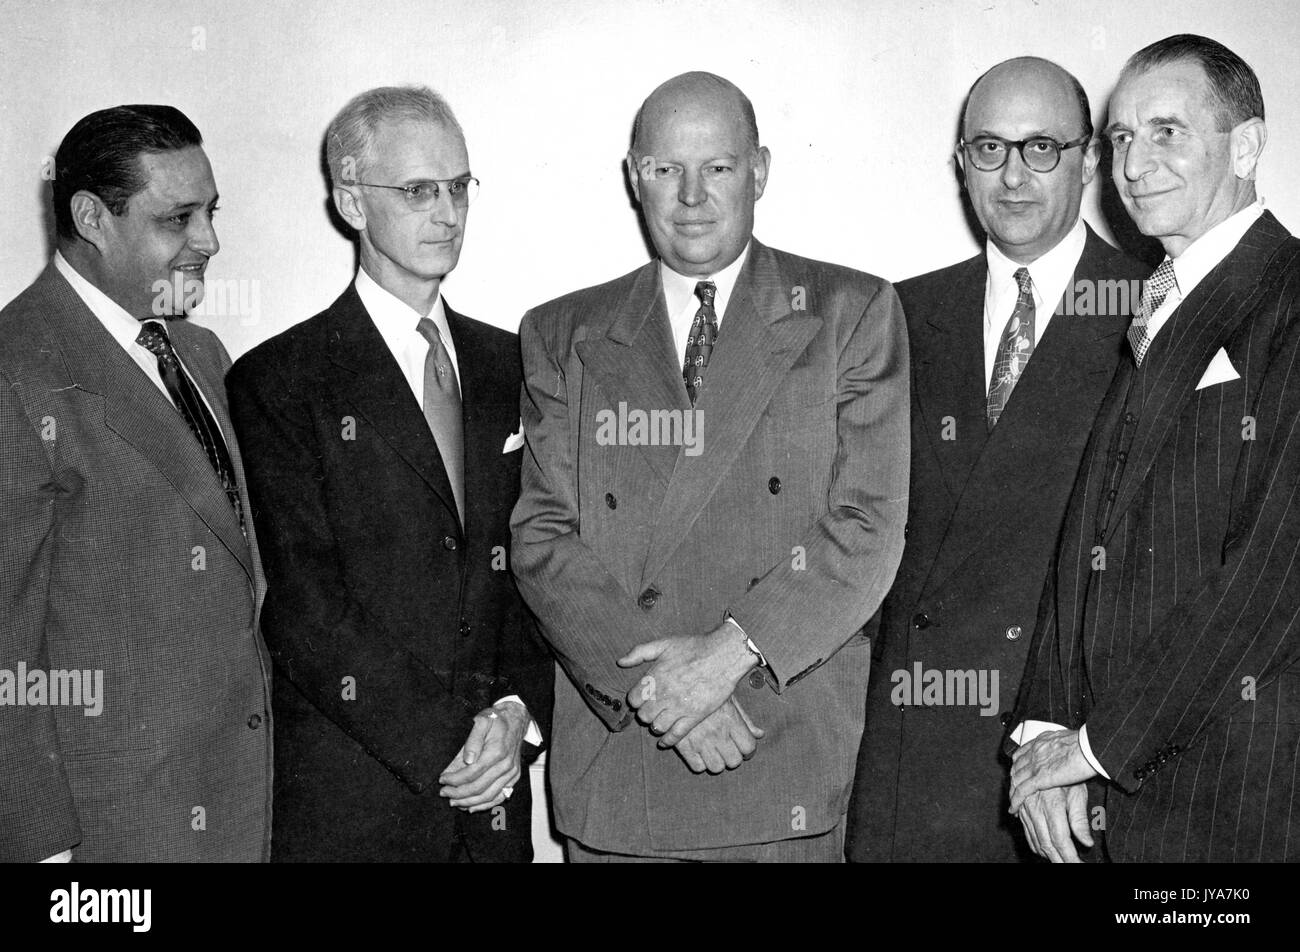 Norman K, American television host Lynn Poole, Dr Allen B DuMont, executive Ben Cohen, and magazine editor Edward Weeks are standing left to right for a group portrait, 1950. Stock Photo